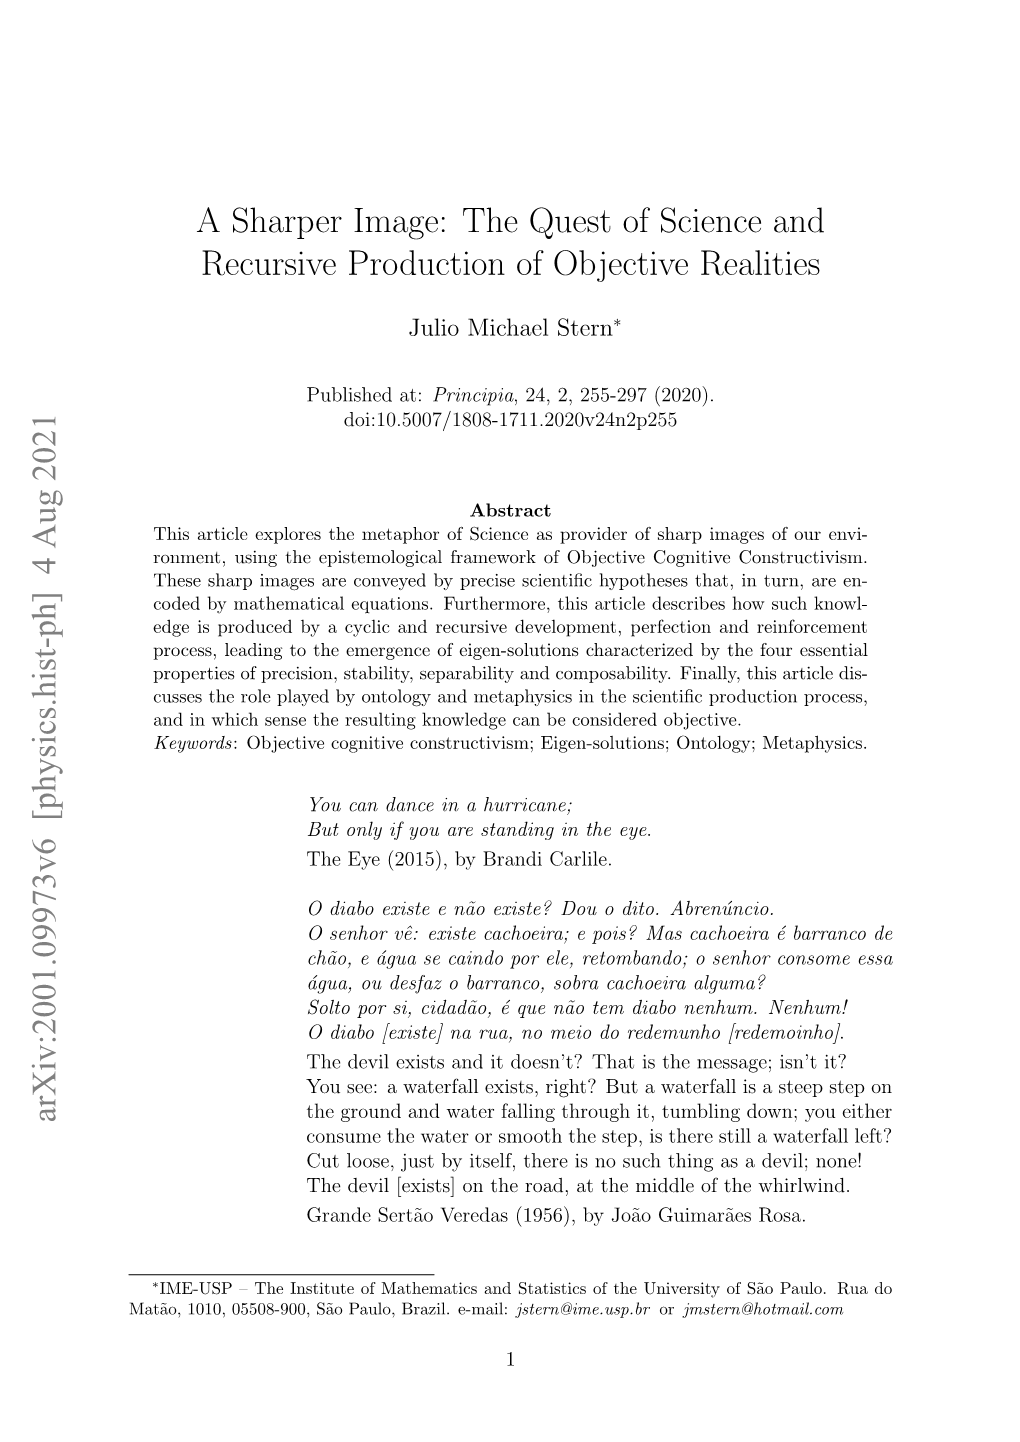 A Sharper Image: the Quest of Science and Recursive Production of Objective Realities